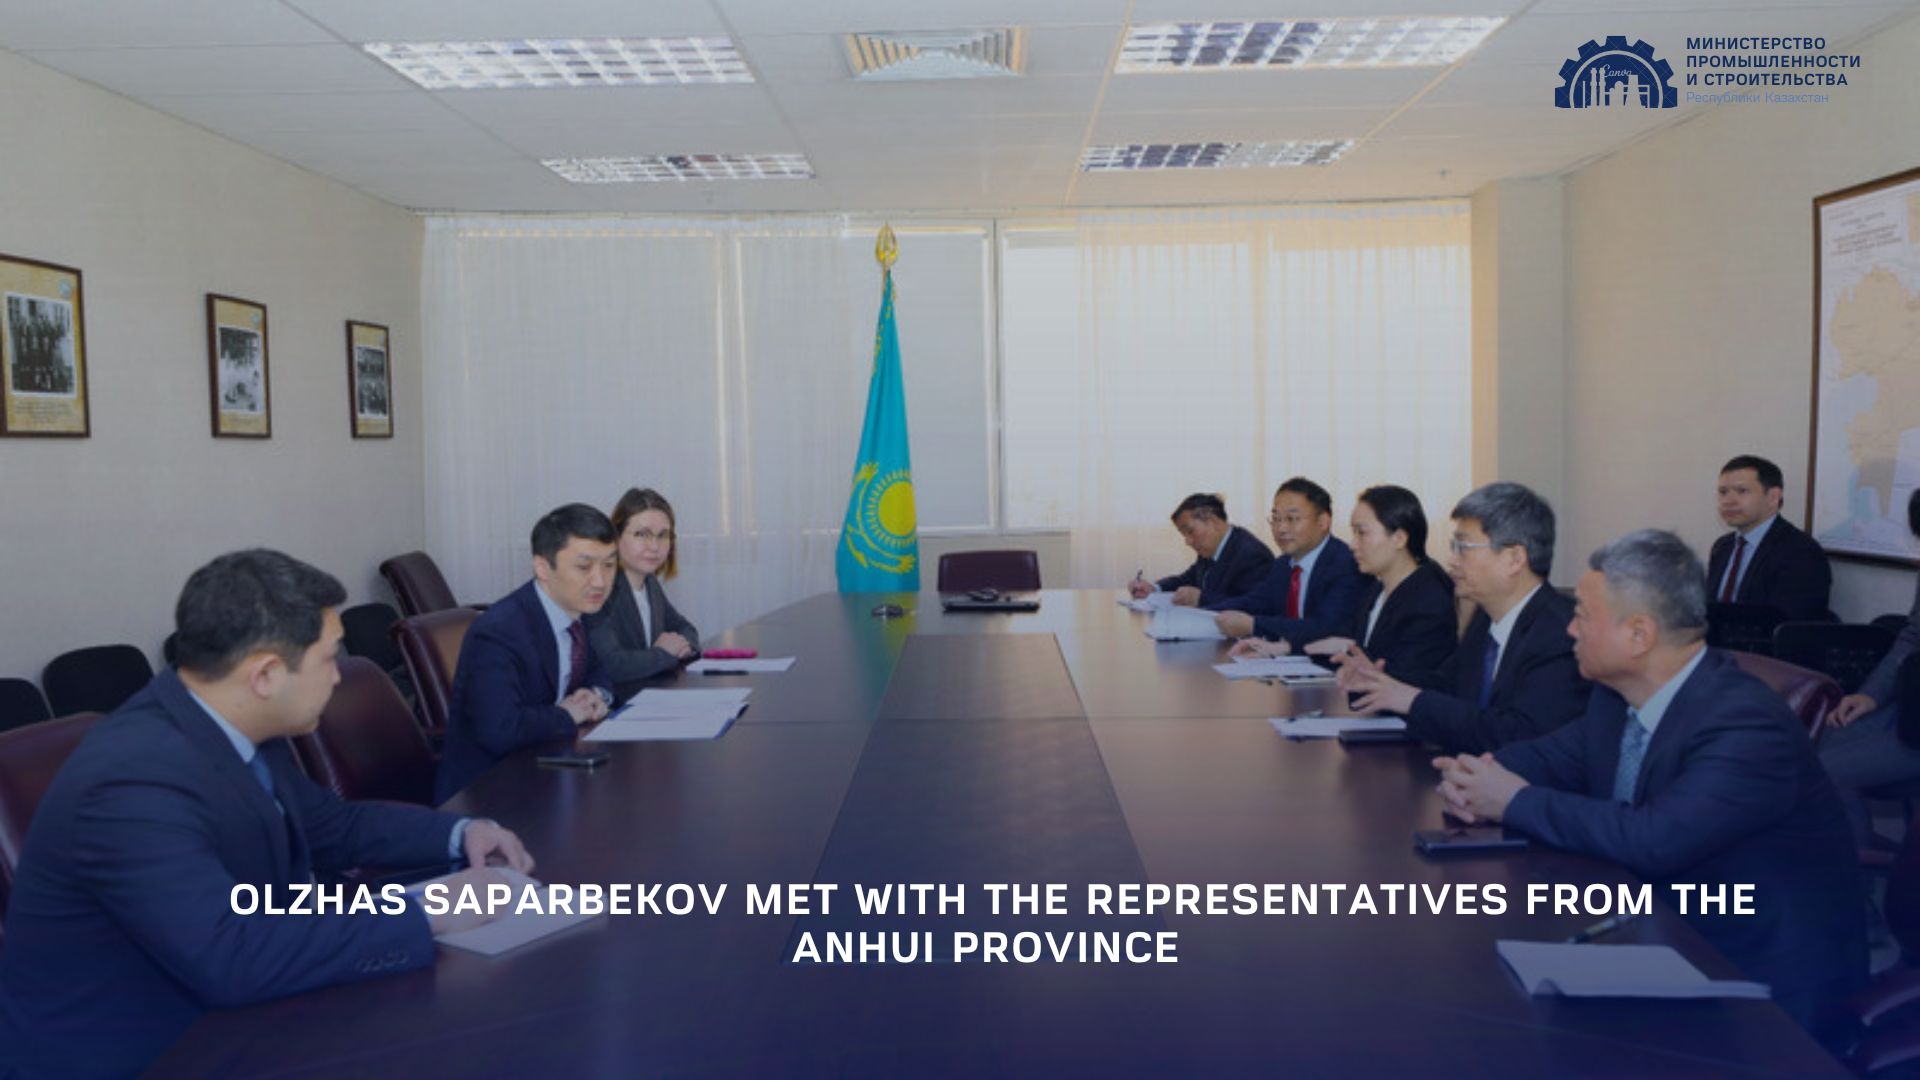 Olzhas Saparbekov met with the representatives from the Anhui Province